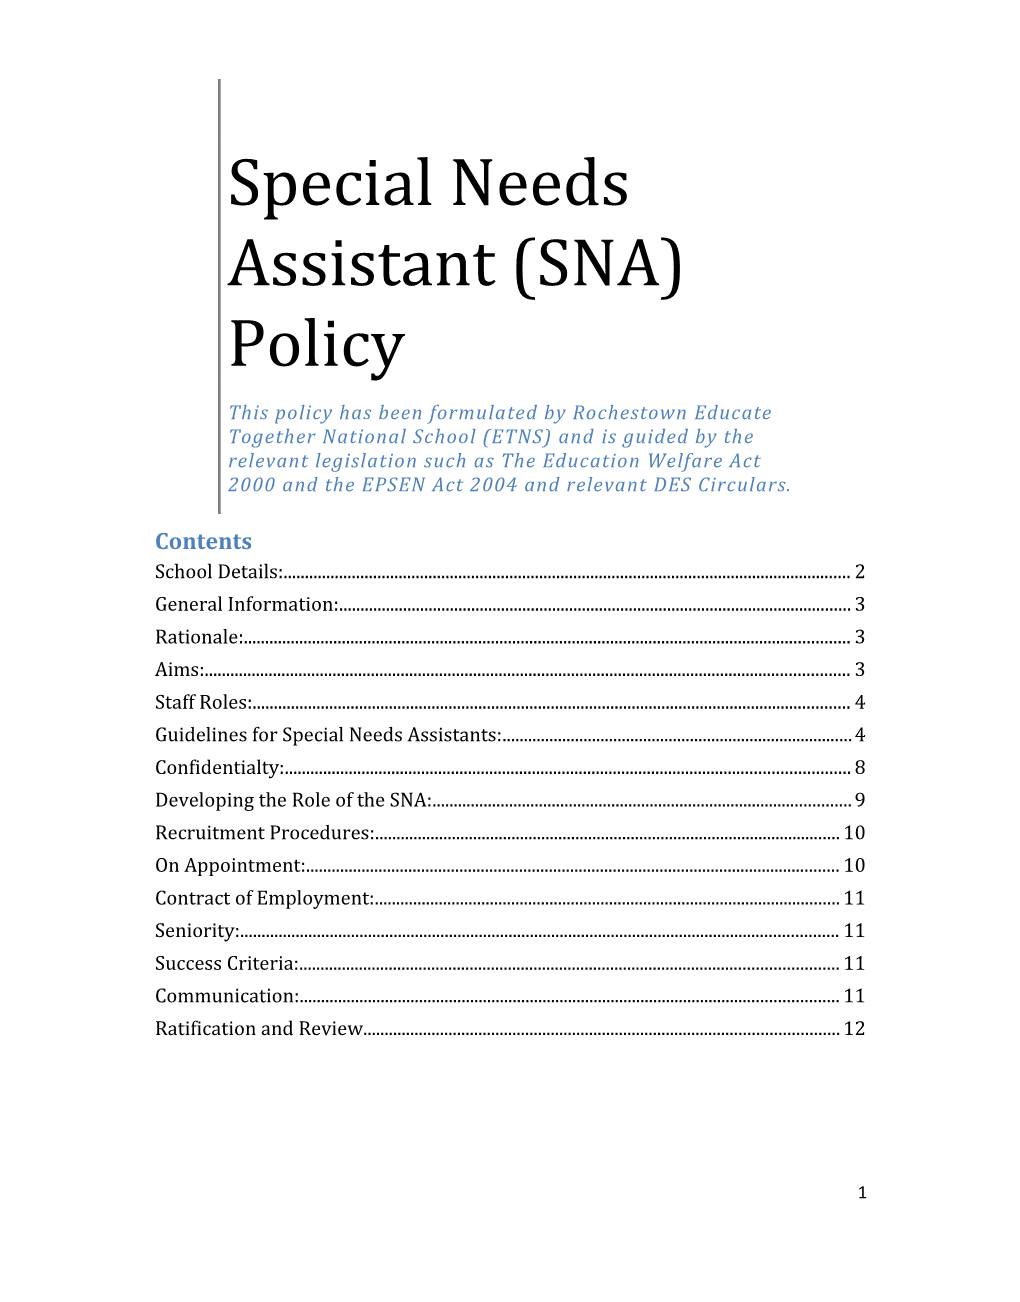 Guidelines for Special Needs Assistants